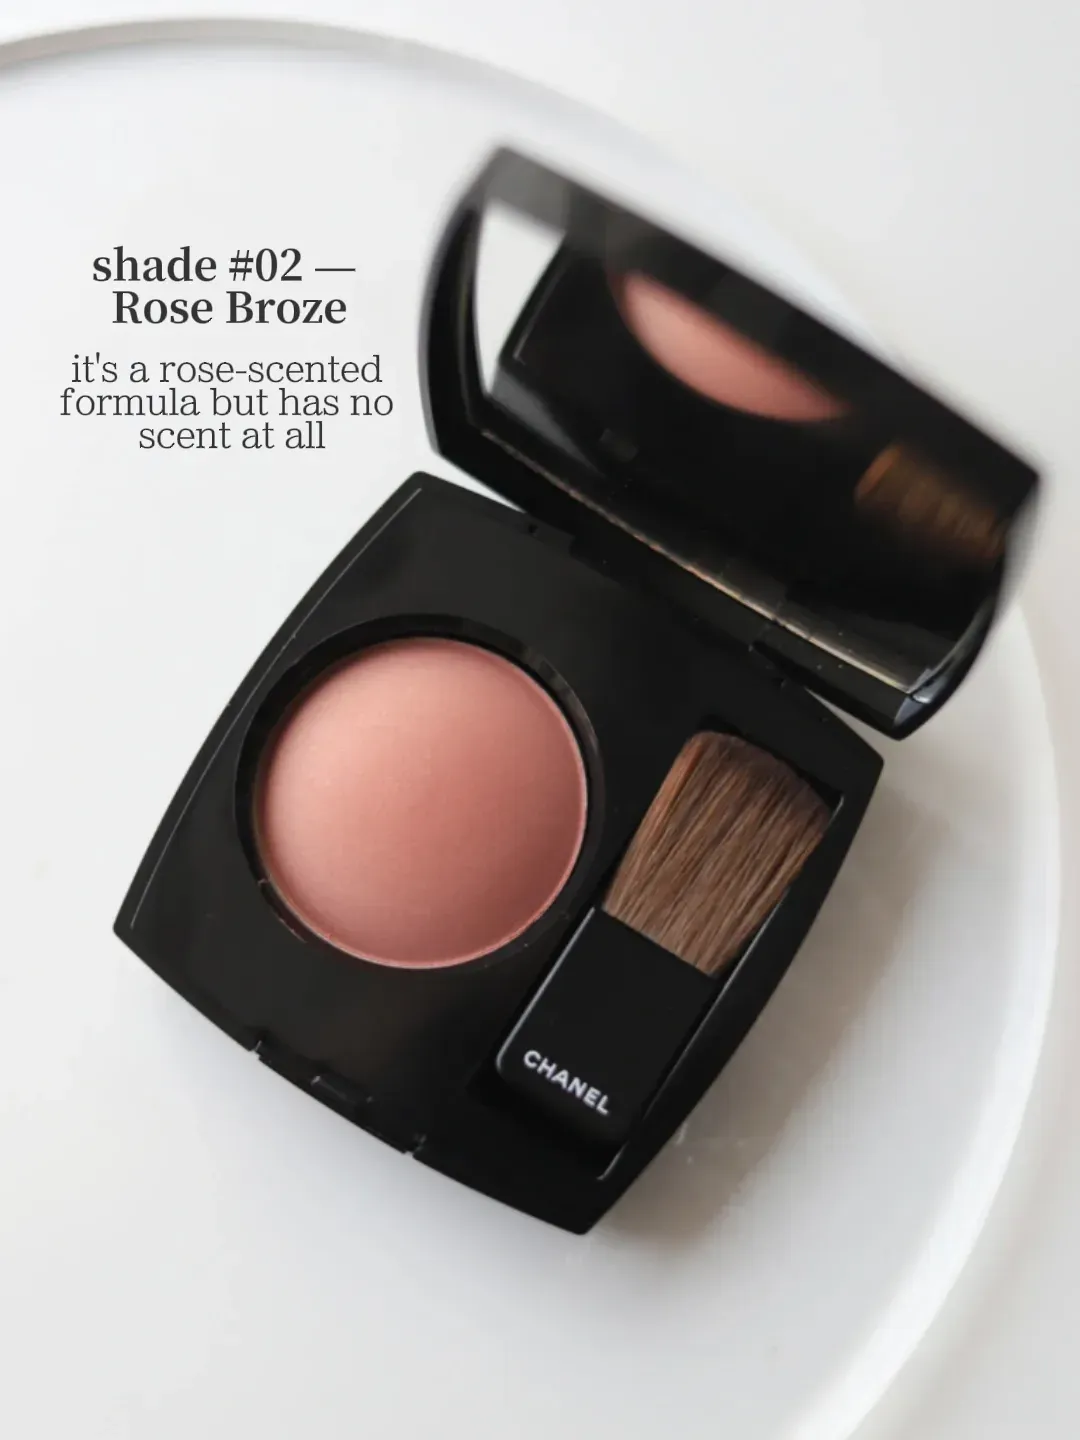 Charlotte Tilbury vs. Chanel powder blush, Gallery posted by Madison Leigh